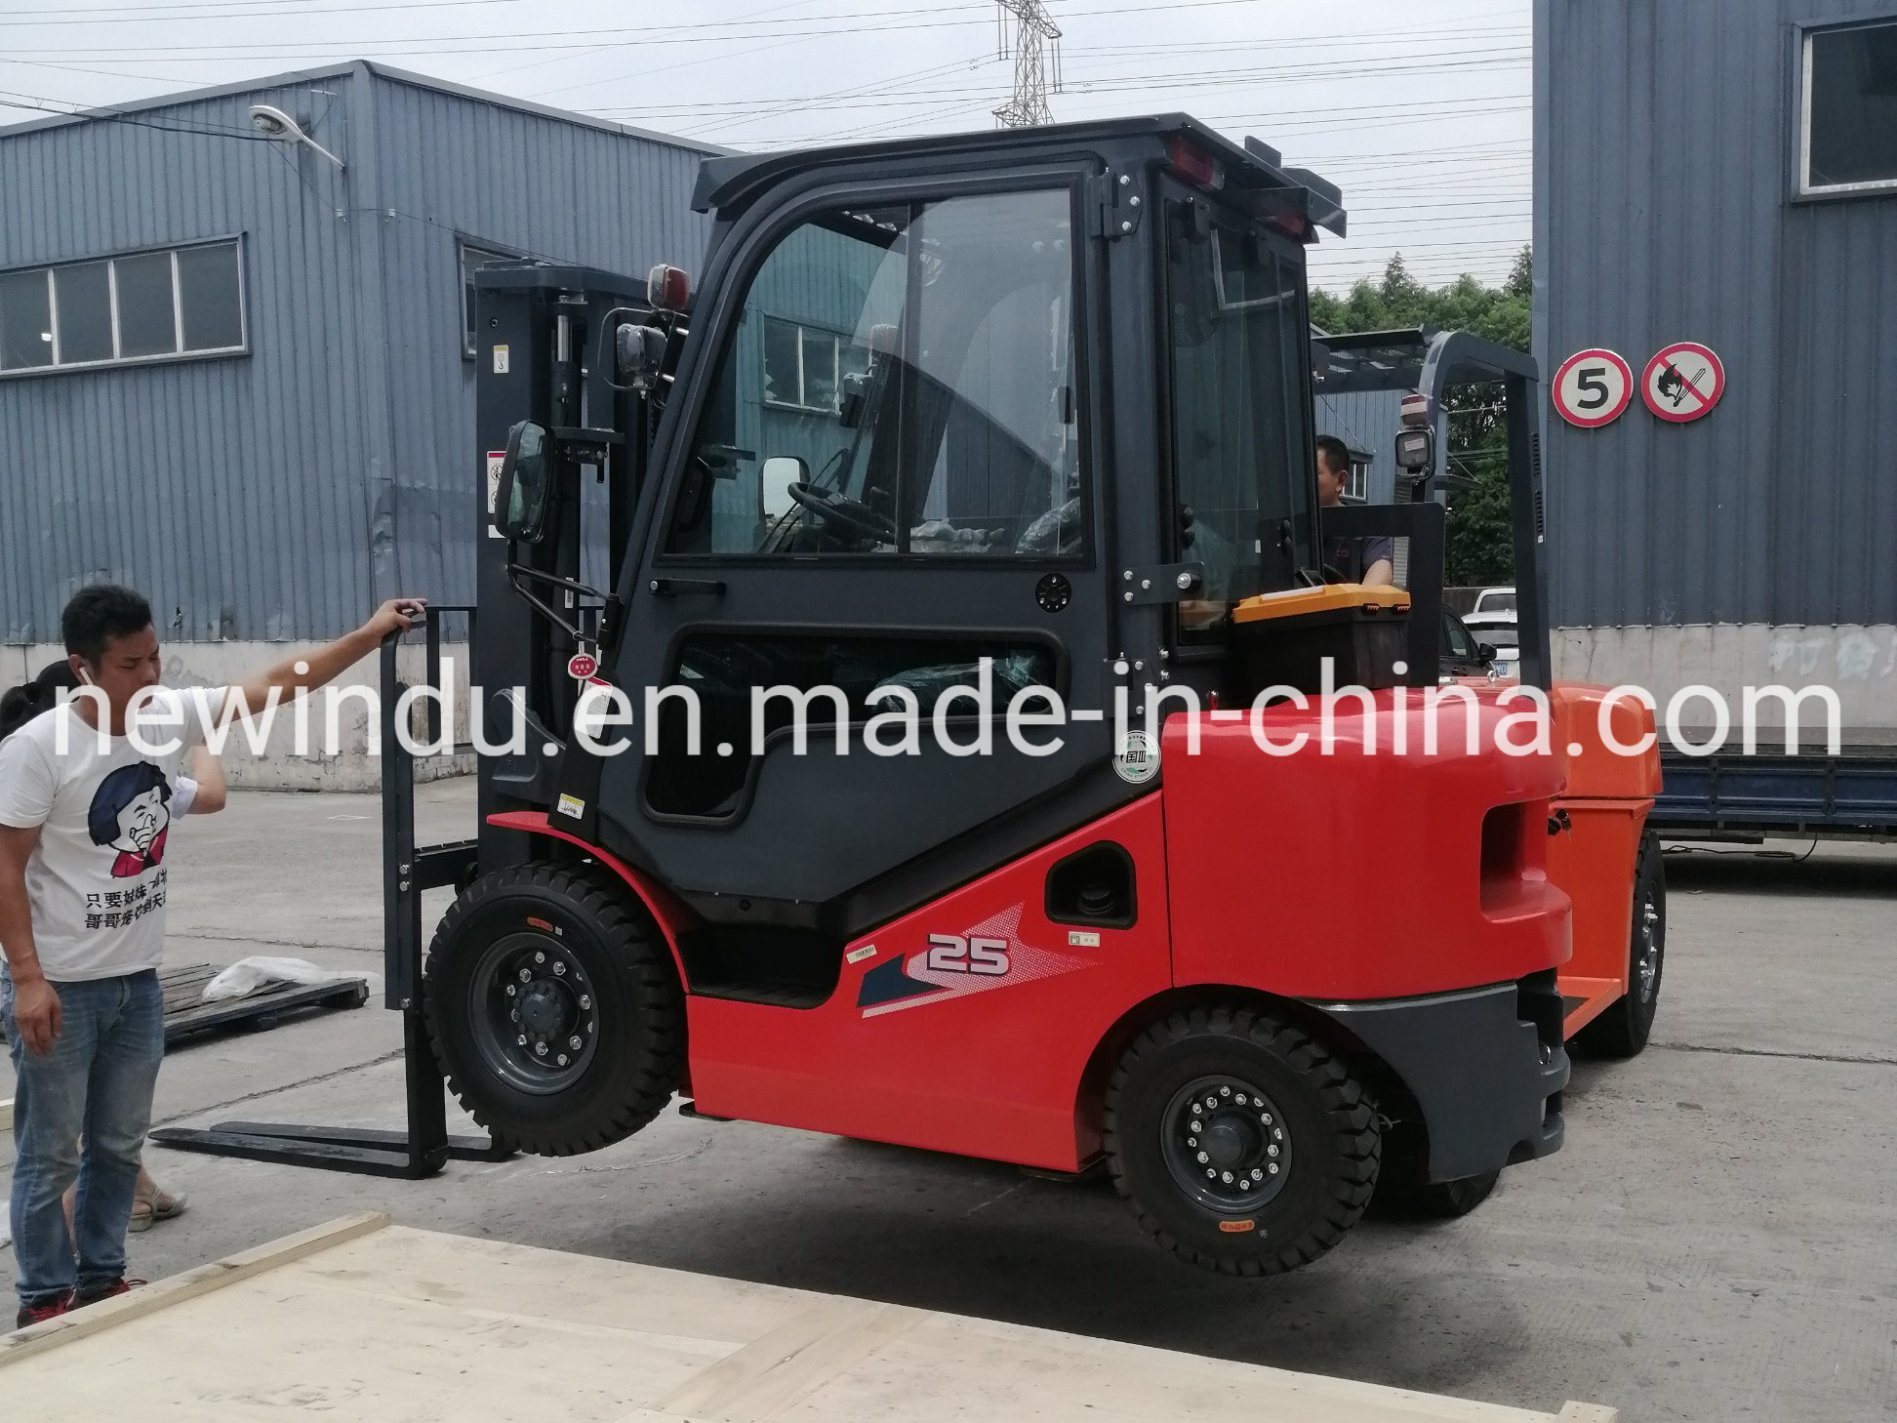 China Famous Brand Heli 2.5 Ton Diesel Forklift Cpcd25 for Sale